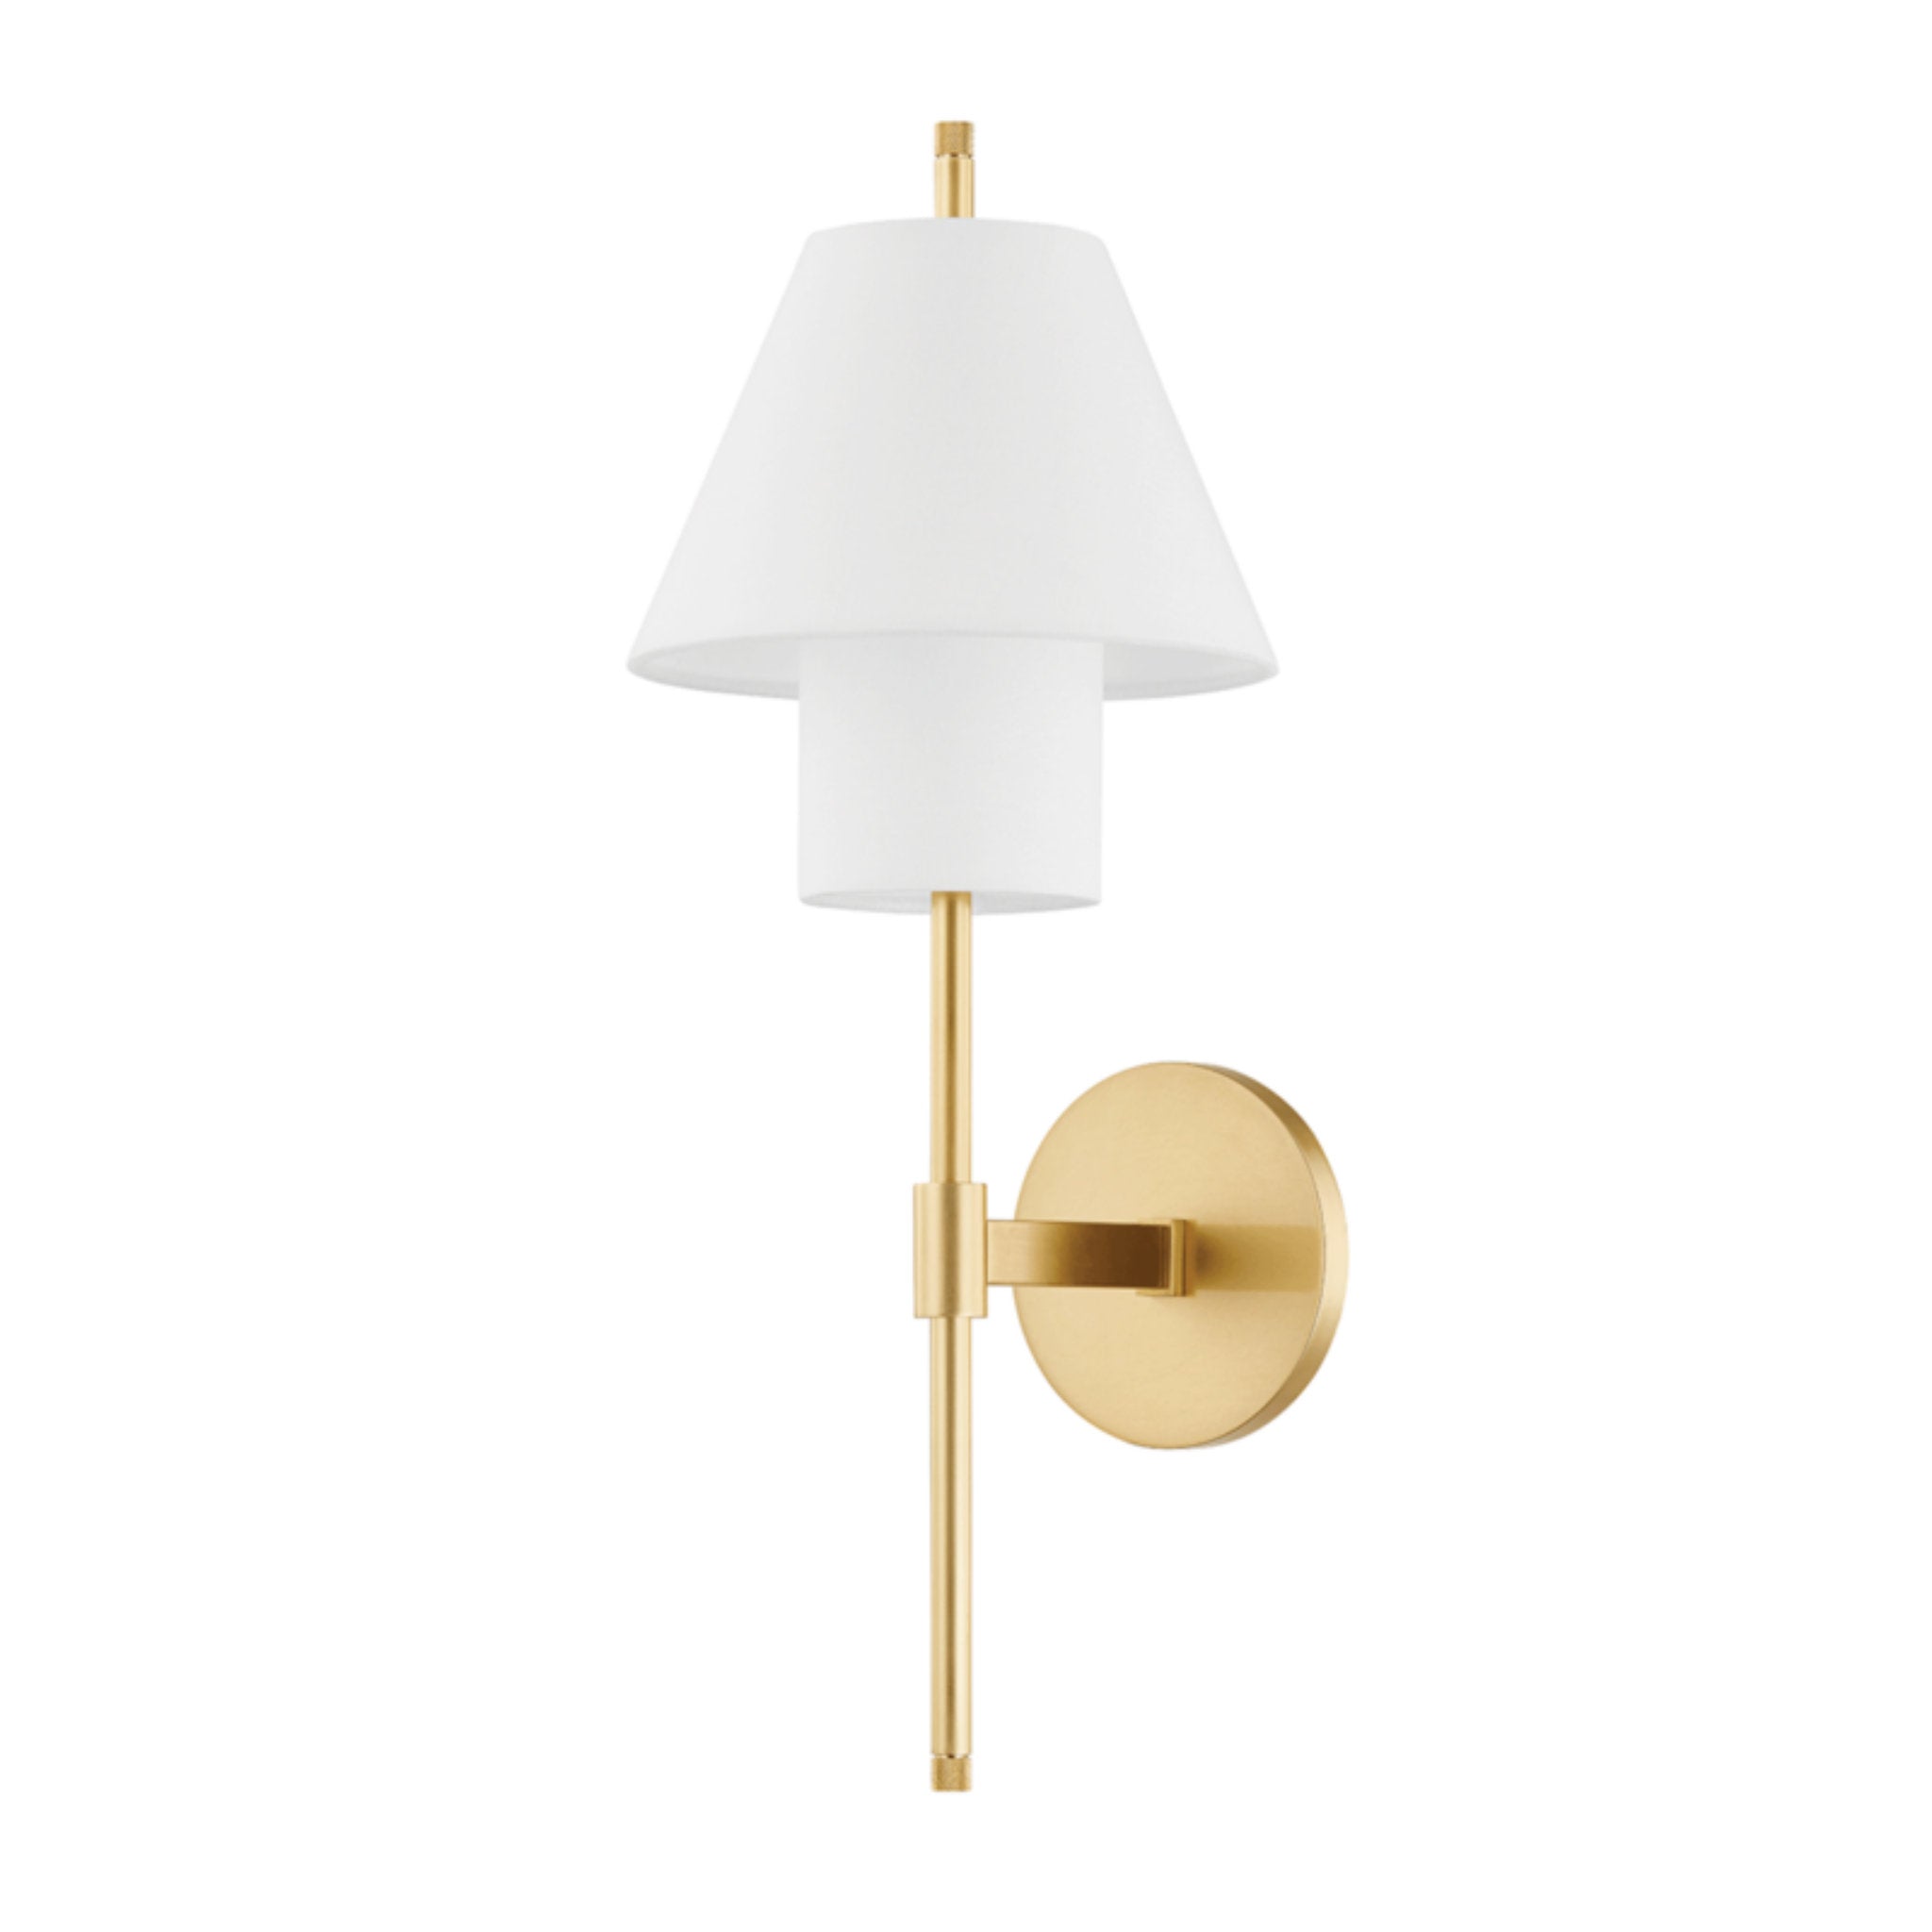 Glenmoore 1 Light Wall Sconce in Aged Brass by Pembrooke & Ives